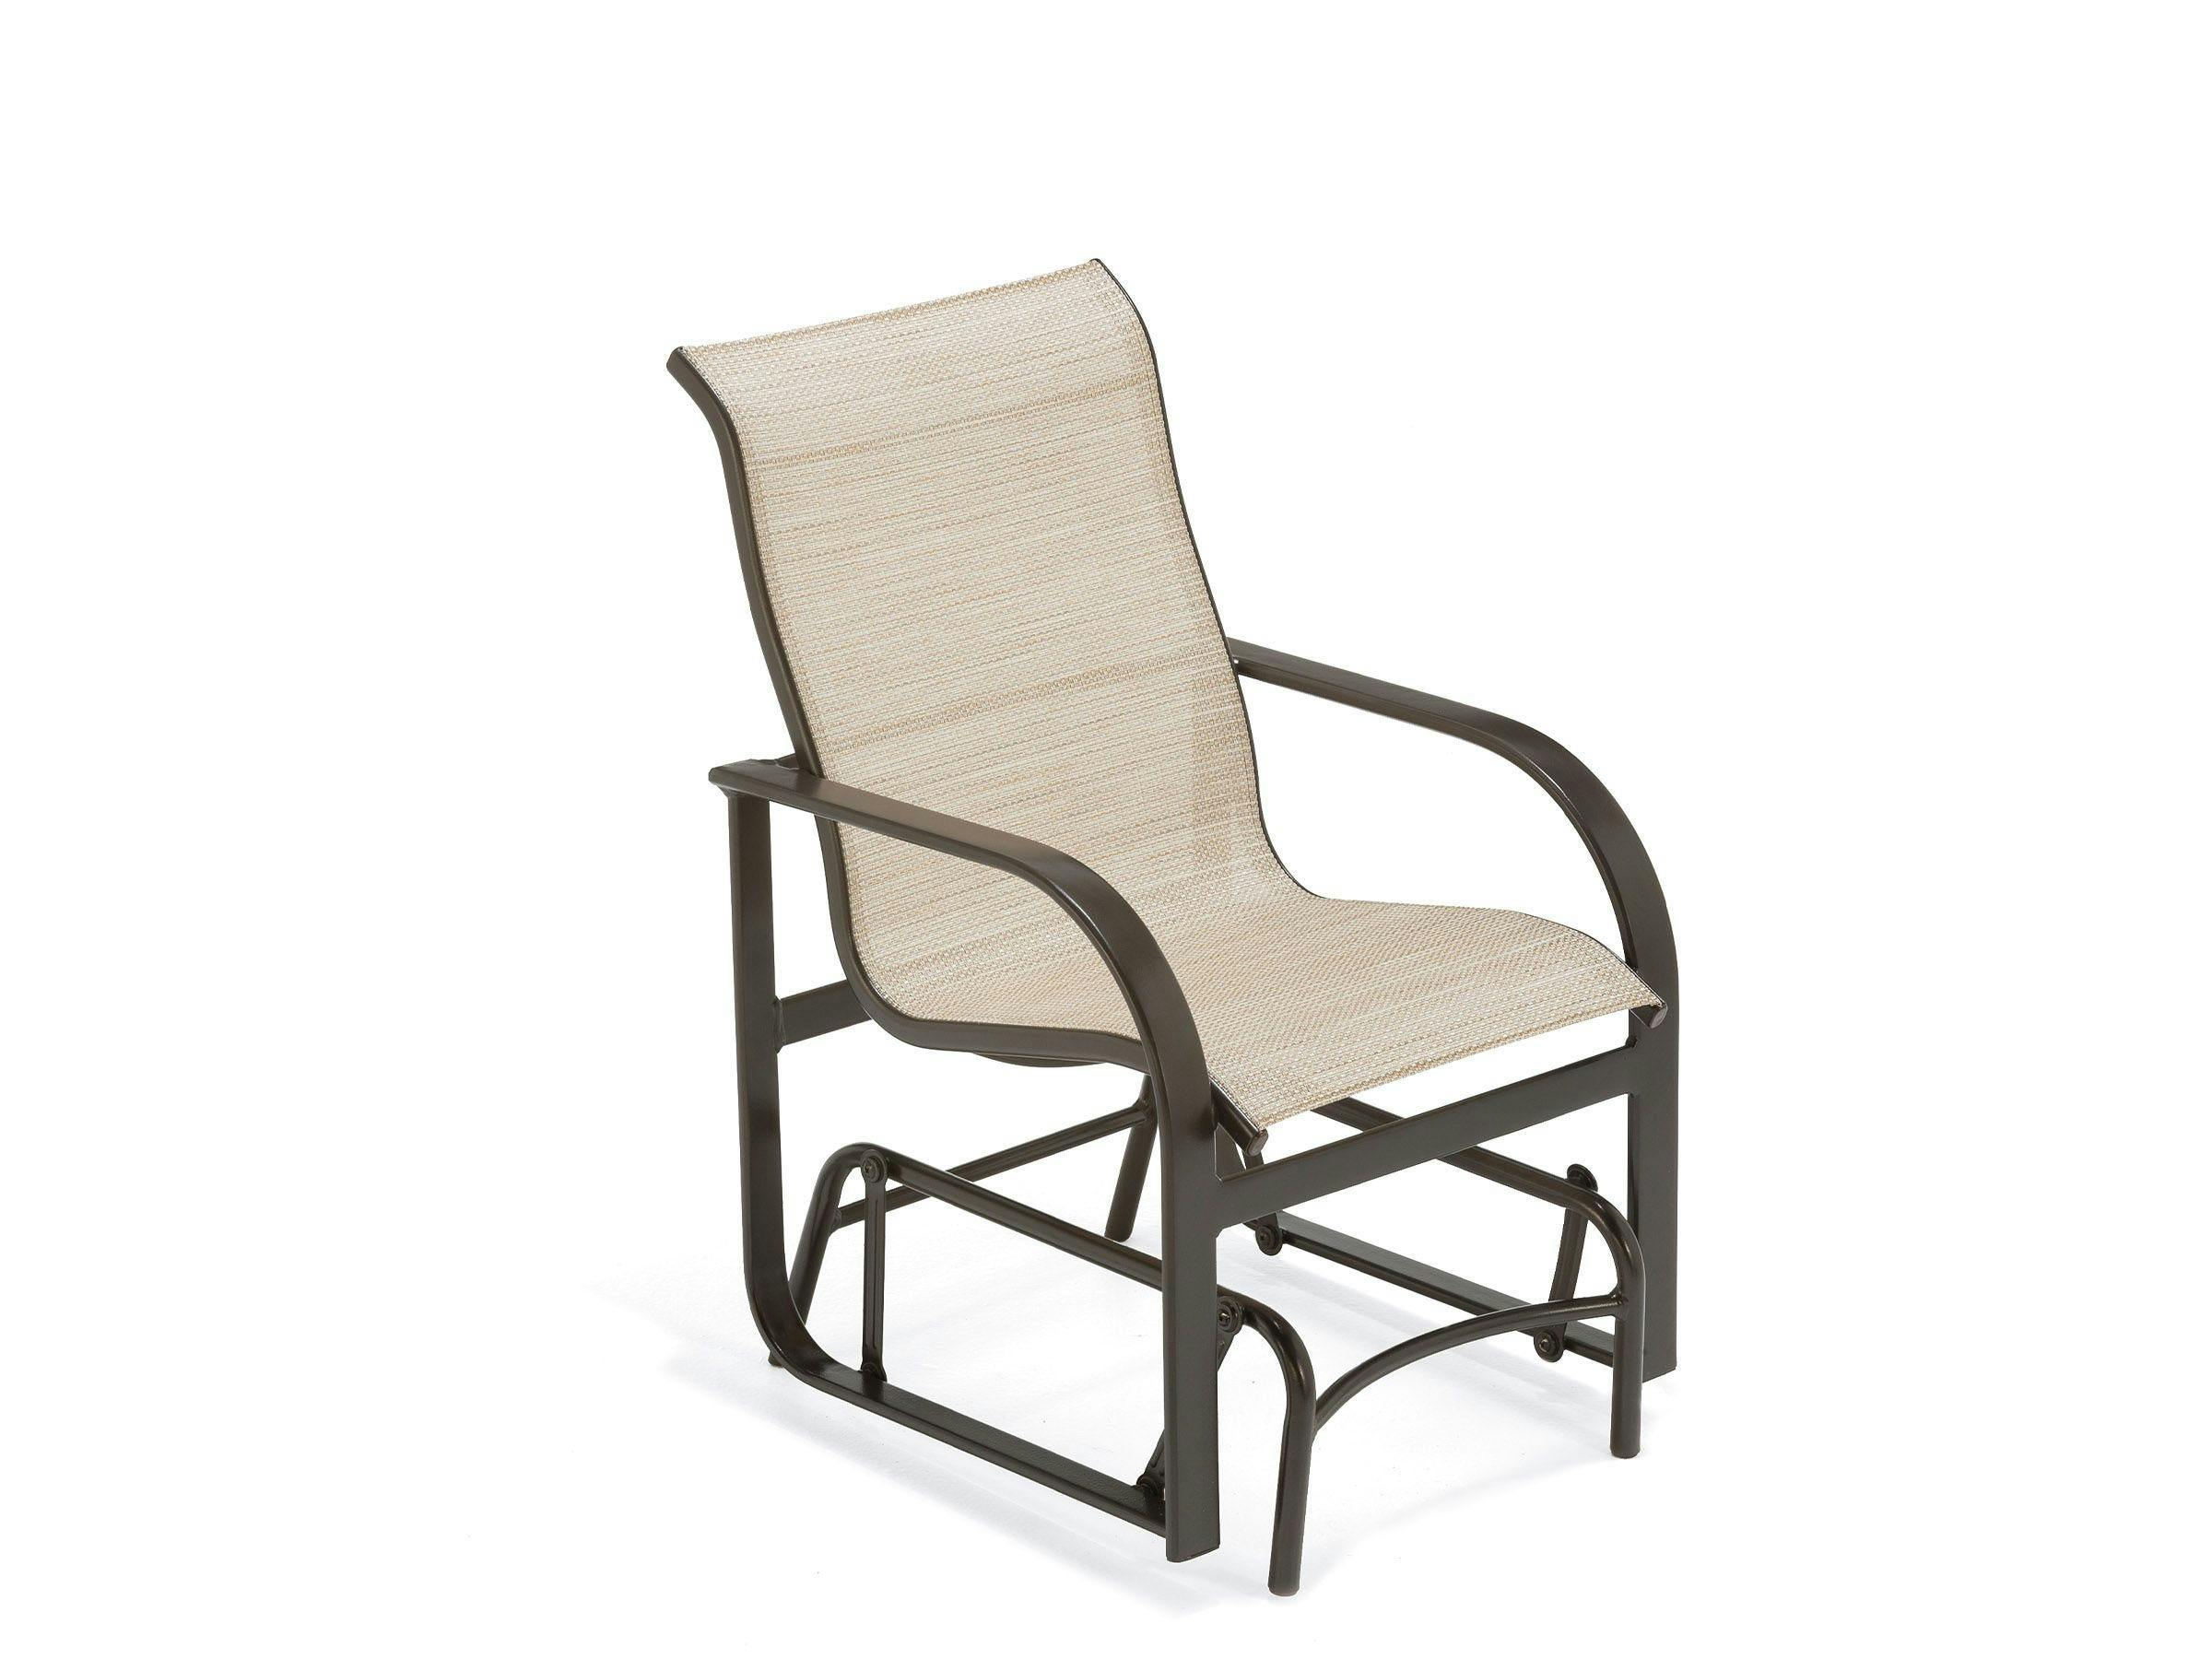 Key West Sling Glider Lounge Chair